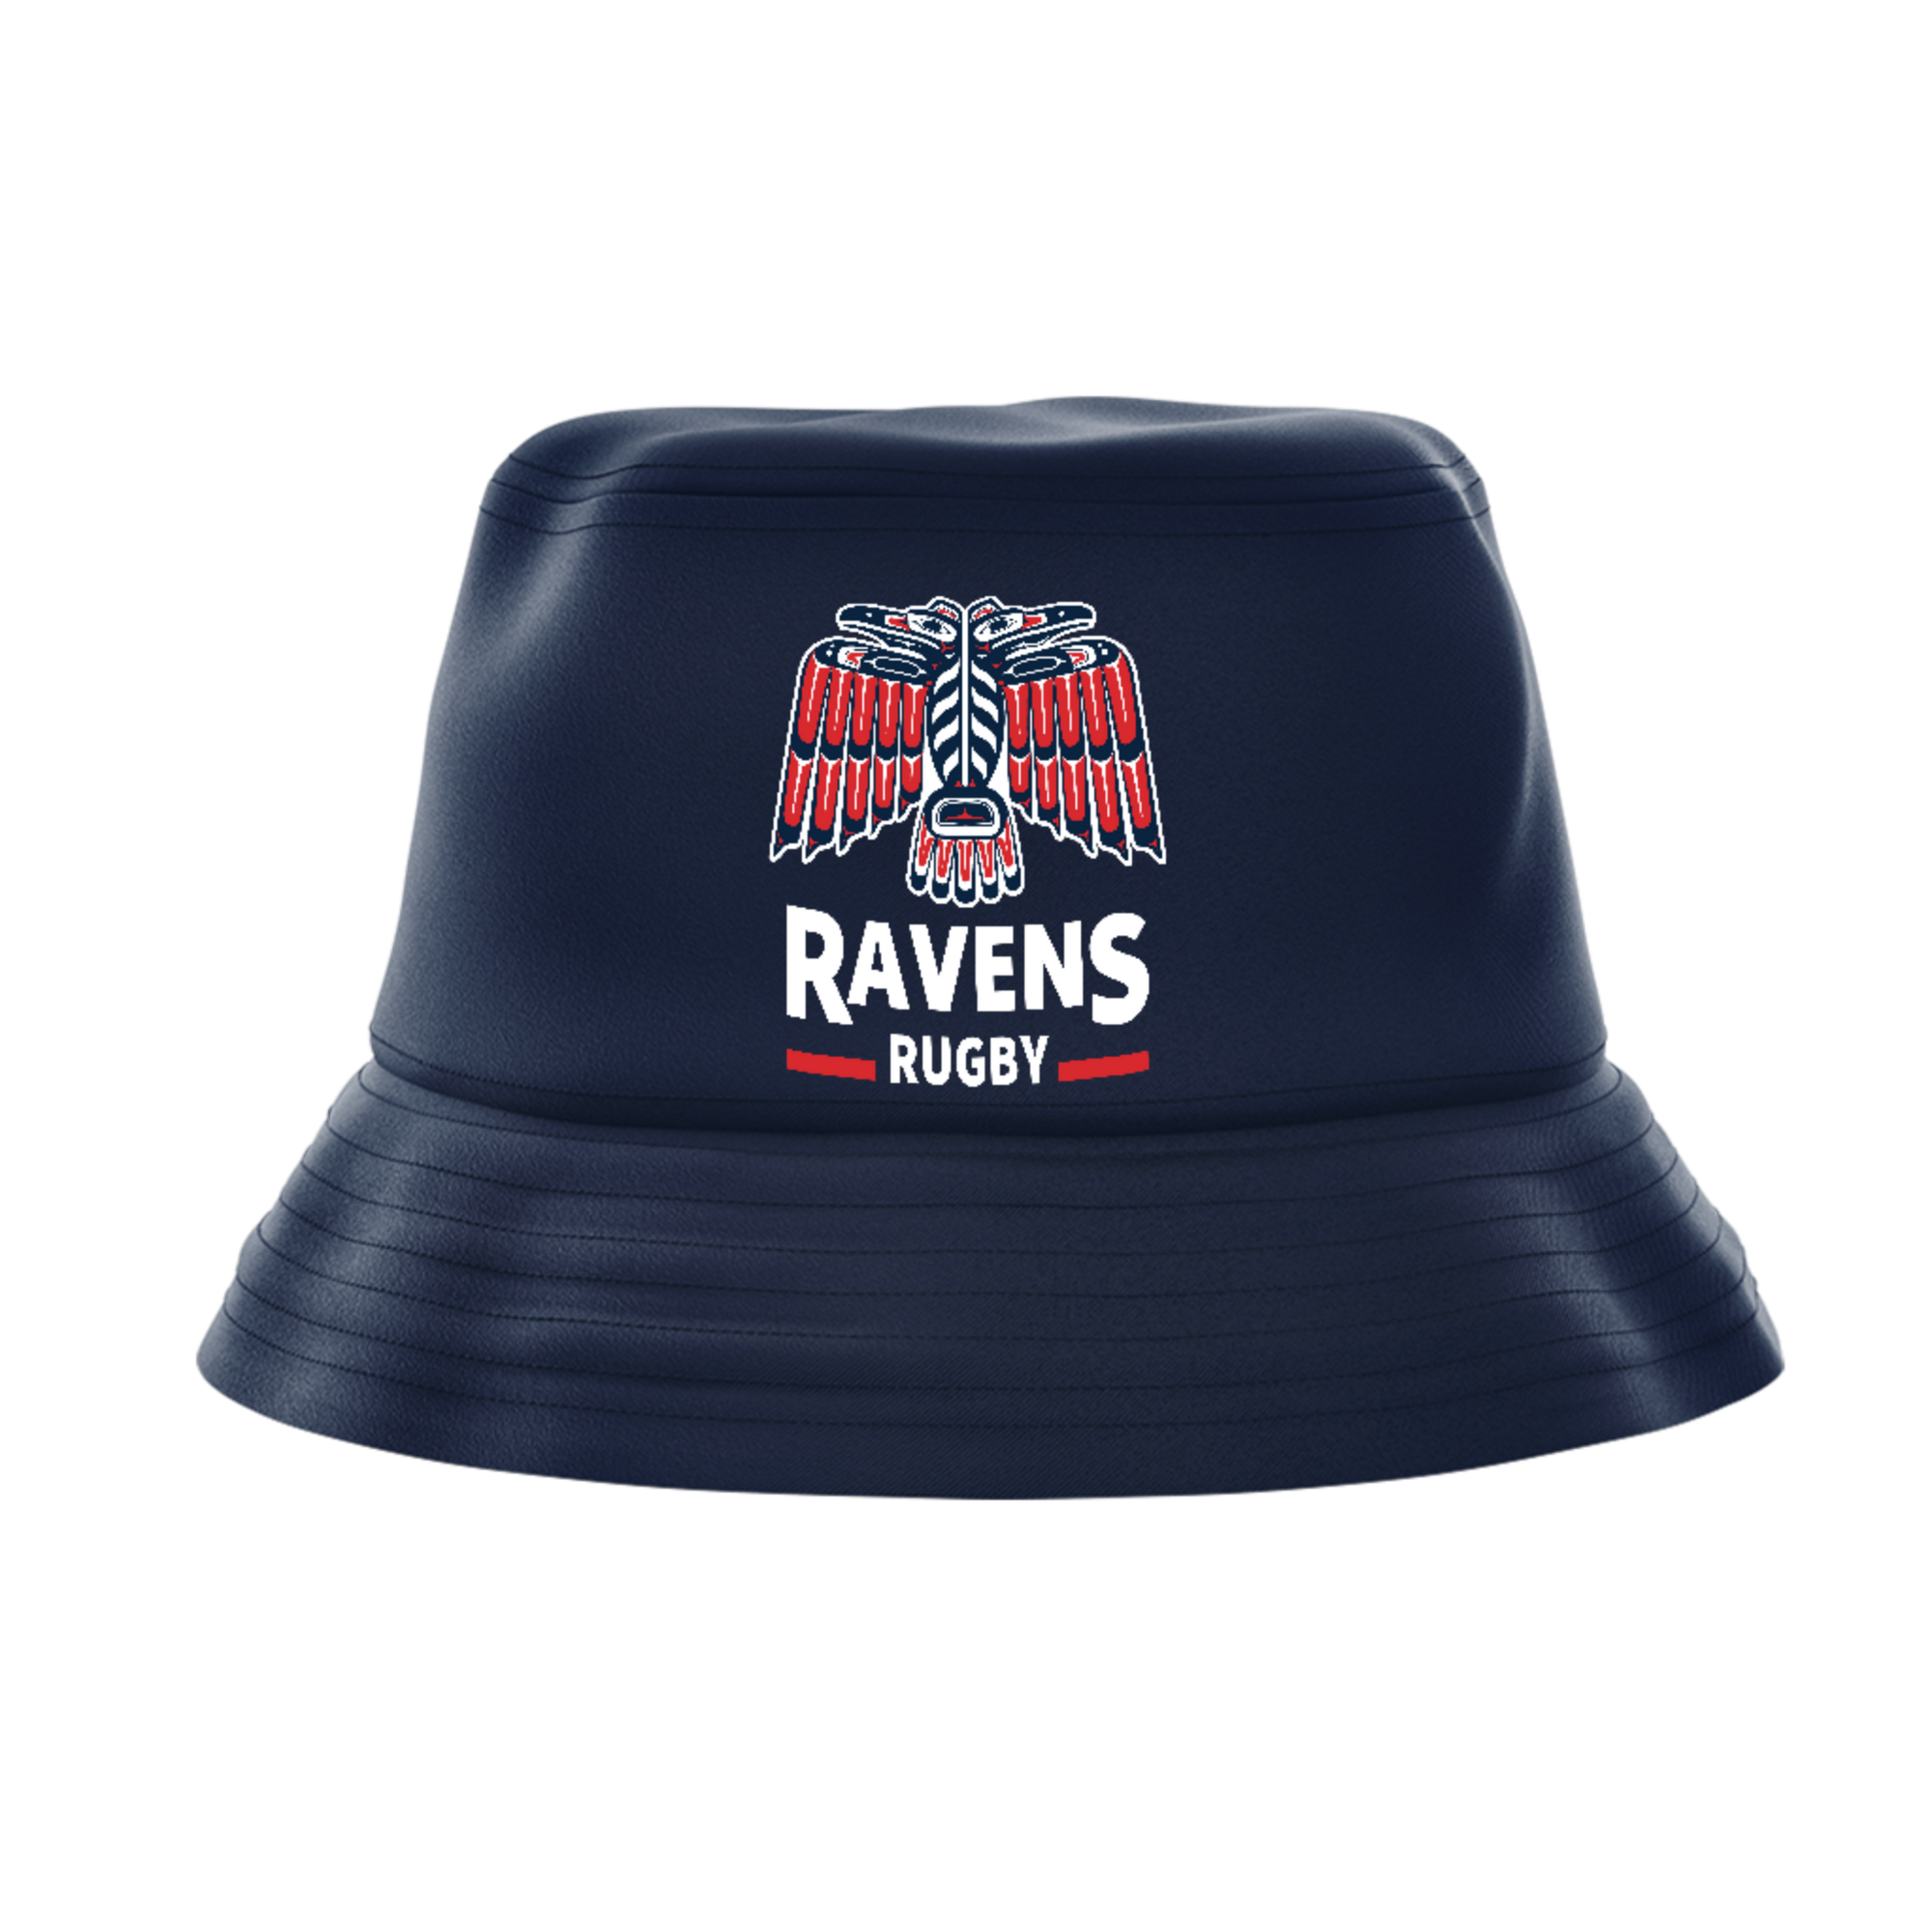 UBCOB Ravens Bucket Hat - Adult Unisex - Navy -Stylish Sun Protection for Rugby Fans